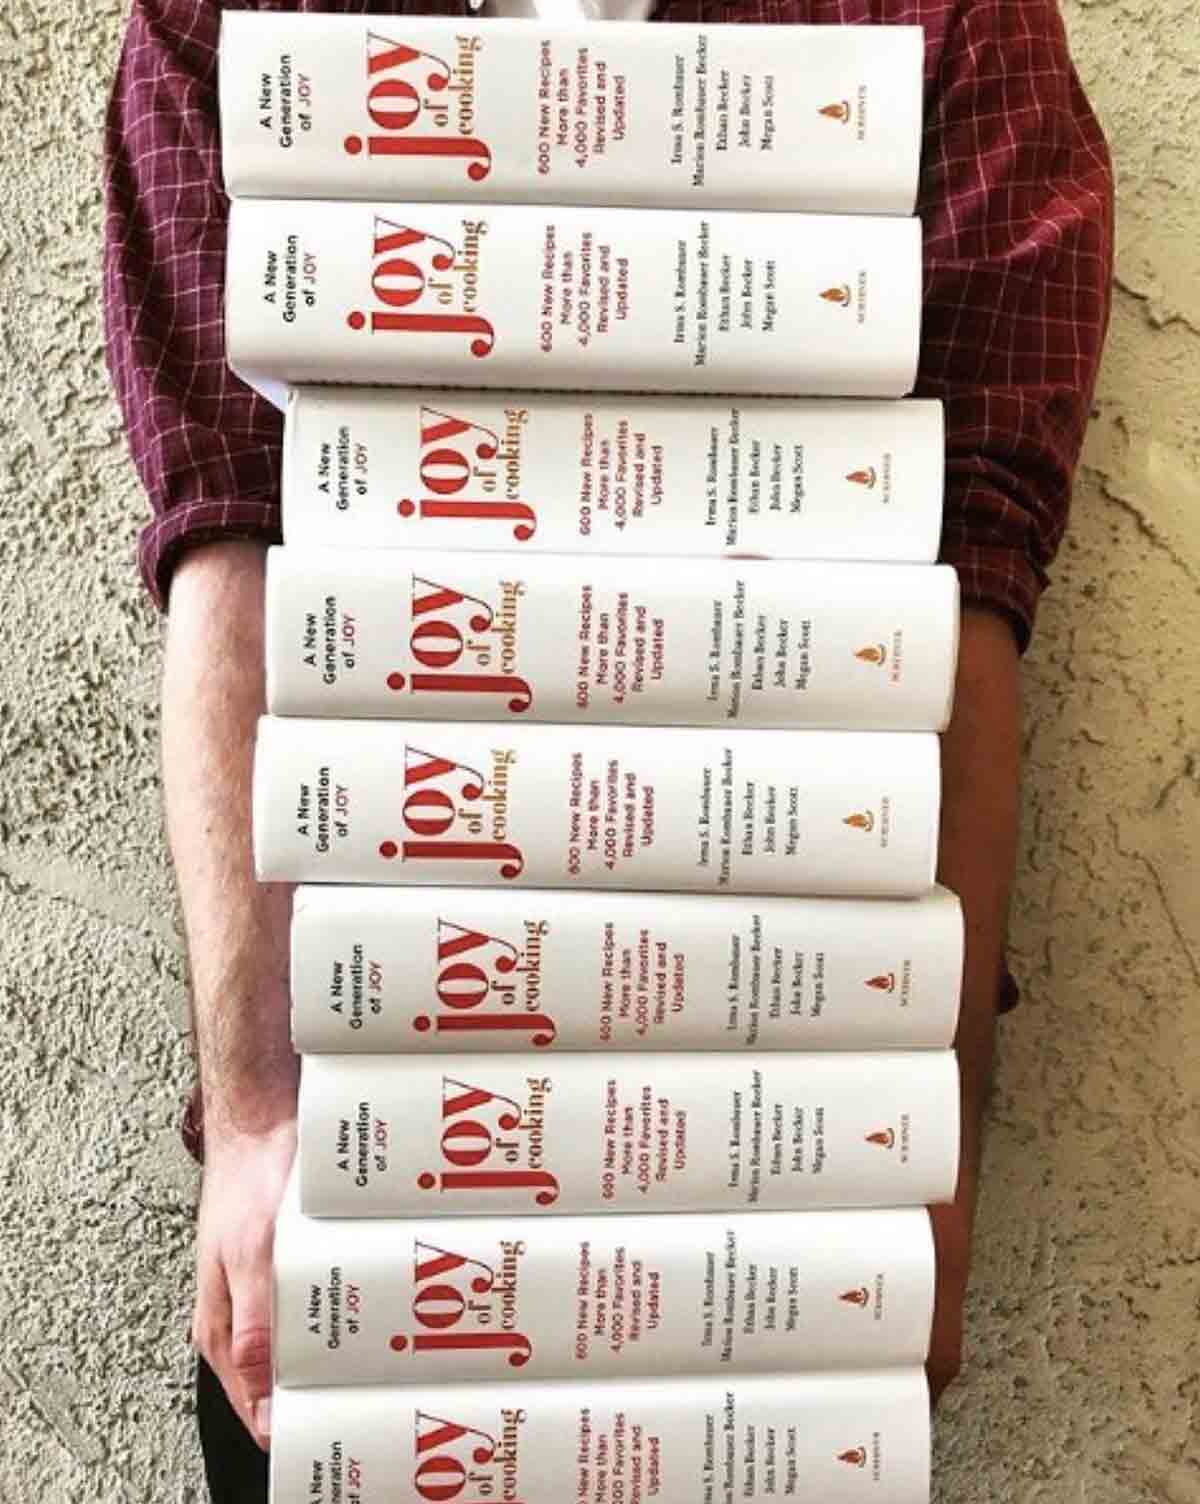 A person holding a stack of Joy of Cooking books.